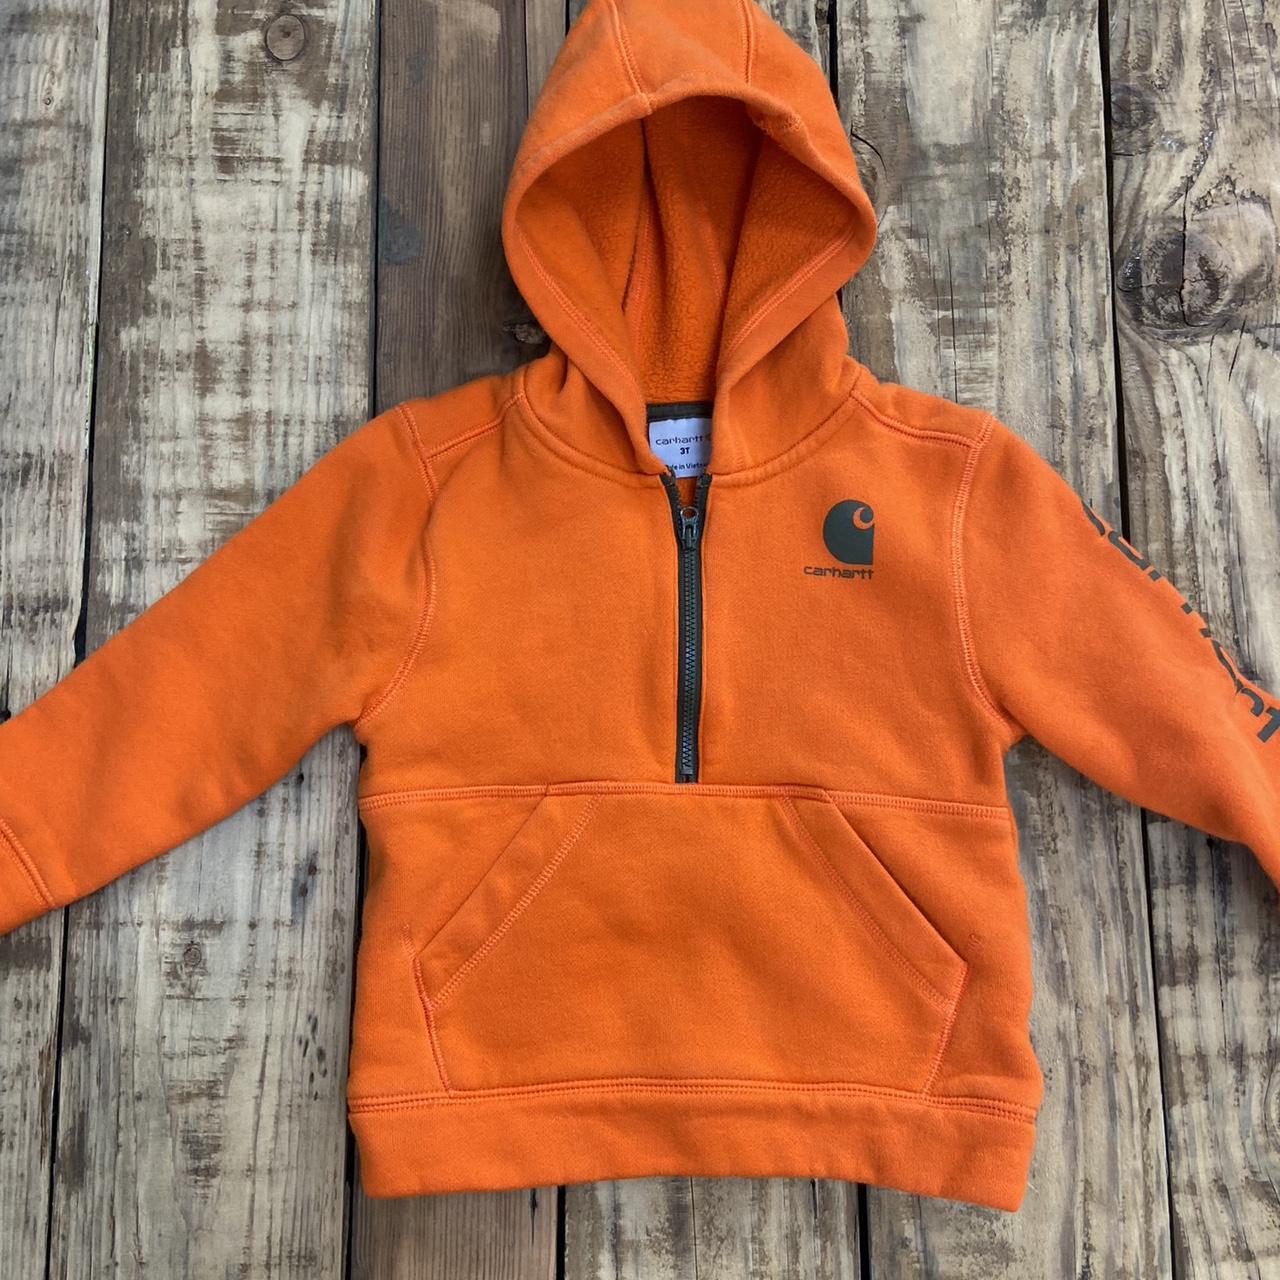 Baby carhartt hoodie size 3T #babyclothes #babies... - Depop